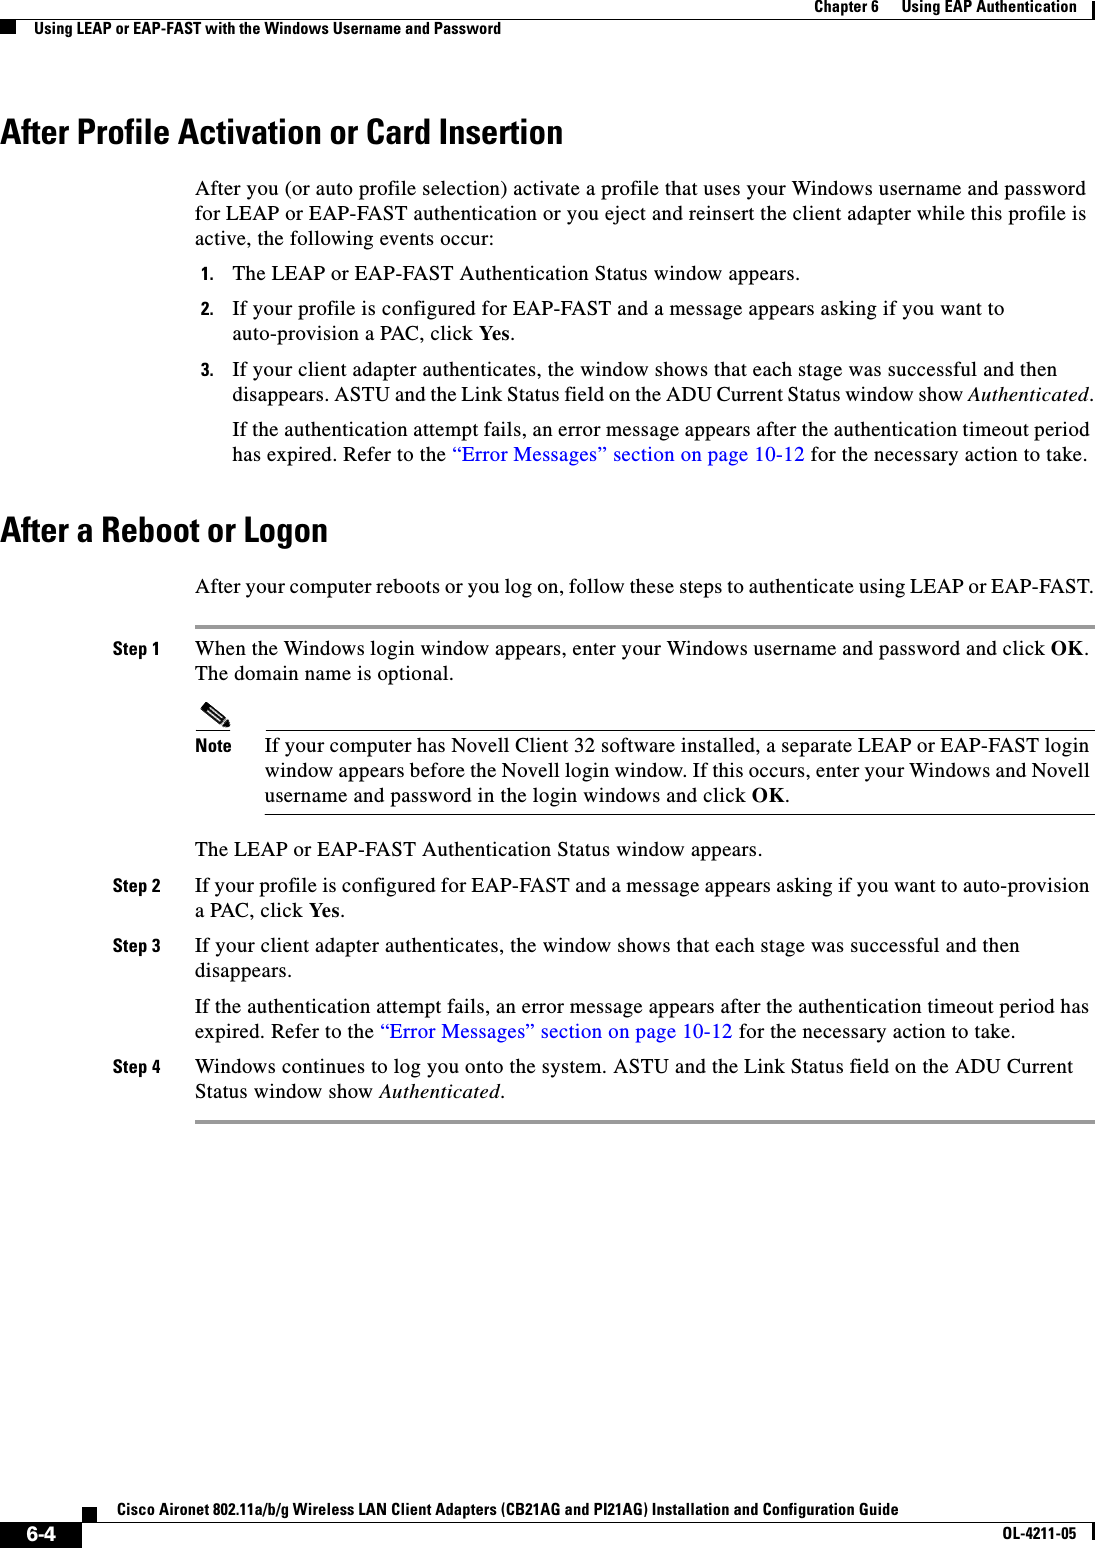 6-4Cisco Aironet 802.11a/b/g Wireless LAN Client Adapters (CB21AG and PI21AG) Installation and Configuration GuideOL-4211-05Chapter 6      Using EAP AuthenticationUsing LEAP or EAP-FAST with the Windows Username and PasswordAfter Profile Activation or Card InsertionAfter you (or auto profile selection) activate a profile that uses your Windows username and password for LEAP or EAP-FAST authentication or you eject and reinsert the client adapter while this profile is active, the following events occur:1. The LEAP or EAP-FAST Authentication Status window appears.2. If your profile is configured for EAP-FAST and a message appears asking if you want to auto-provision a PAC, click Yes.3. If your client adapter authenticates, the window shows that each stage was successful and then disappears. ASTU and the Link Status field on the ADU Current Status window show Authenticated.If the authentication attempt fails, an error message appears after the authentication timeout period has expired. Refer to the “Error Messages” section on page 10-12 for the necessary action to take.After a Reboot or LogonAfter your computer reboots or you log on, follow these steps to authenticate using LEAP or EAP-FAST.Step 1 When the Windows login window appears, enter your Windows username and password and click OK.The domain name is optional.Note If your computer has Novell Client 32 software installed, a separate LEAP or EAP-FAST login window appears before the Novell login window. If this occurs, enter your Windows and Novell username and password in the login windows and click OK.The LEAP or EAP-FAST Authentication Status window appears.Step 2 If your profile is configured for EAP-FAST and a message appears asking if you want to auto-provision a PAC, click Ye s .Step 3 If your client adapter authenticates, the window shows that each stage was successful and then disappears.If the authentication attempt fails, an error message appears after the authentication timeout period has expired. Refer to the “Error Messages” section on page 10-12 for the necessary action to take.Step 4 Windows continues to log you onto the system. ASTU and the Link Status field on the ADU Current Status window show Authenticated.